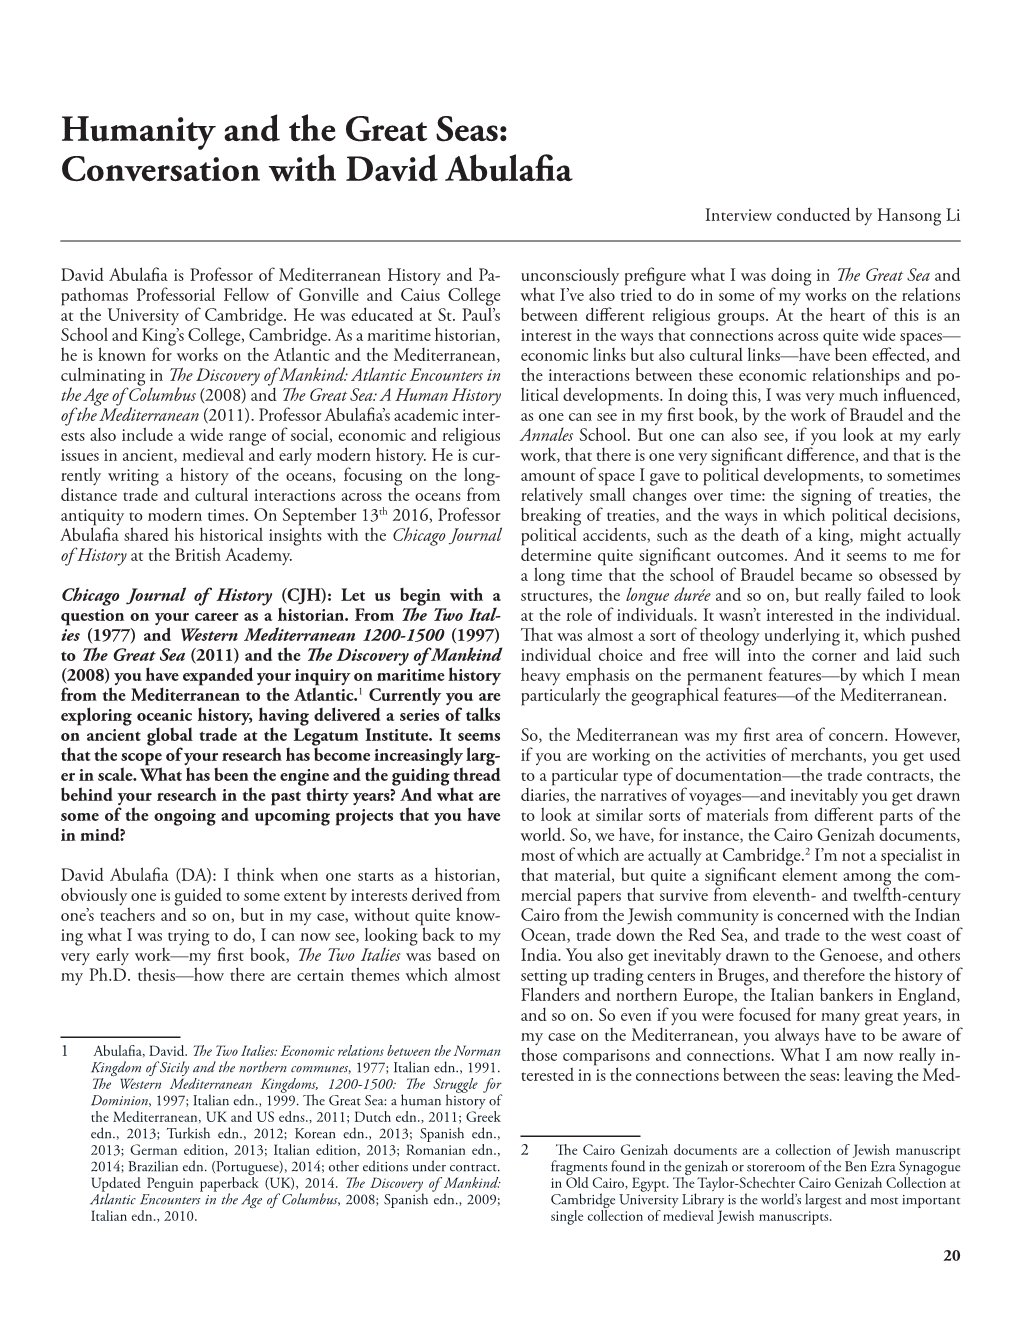 Conversation with David Abulafia Interview Conducted by Hansong Li